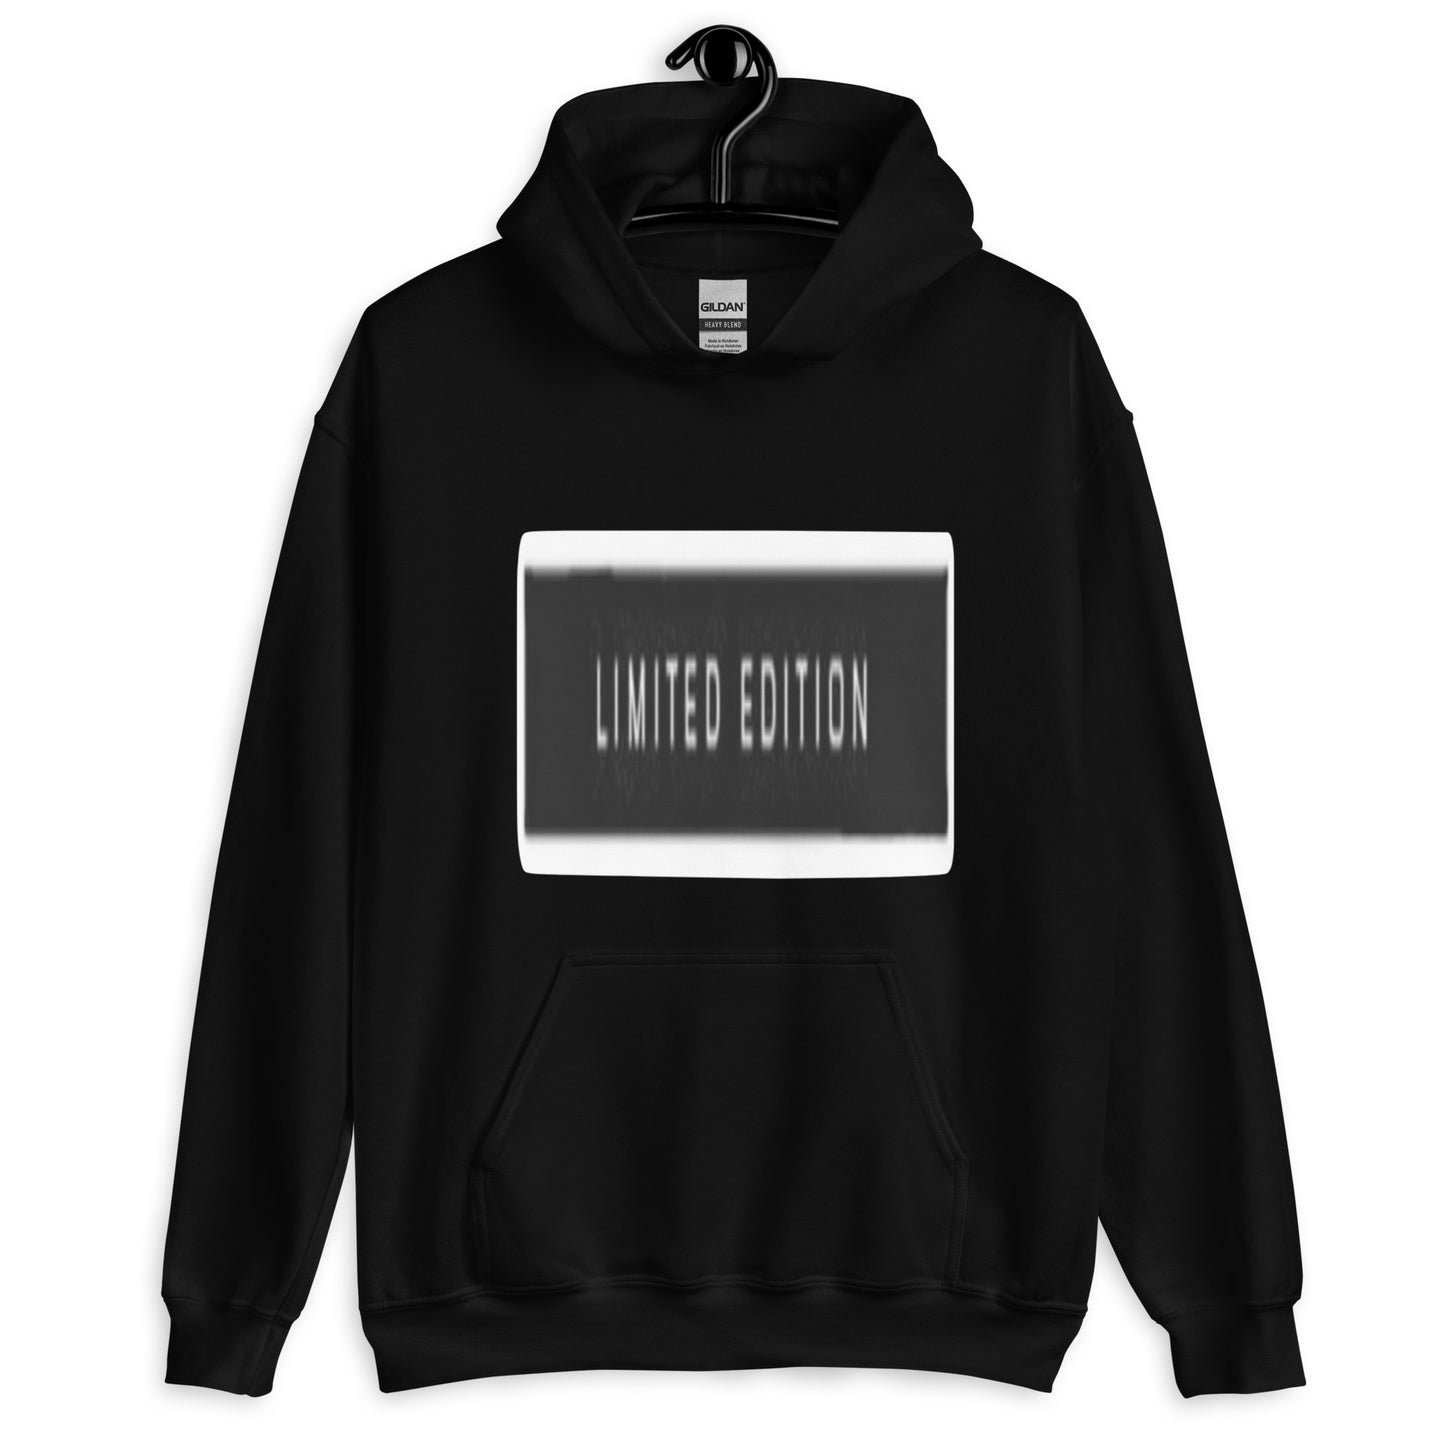 Limited Edition Unisex Hoodie